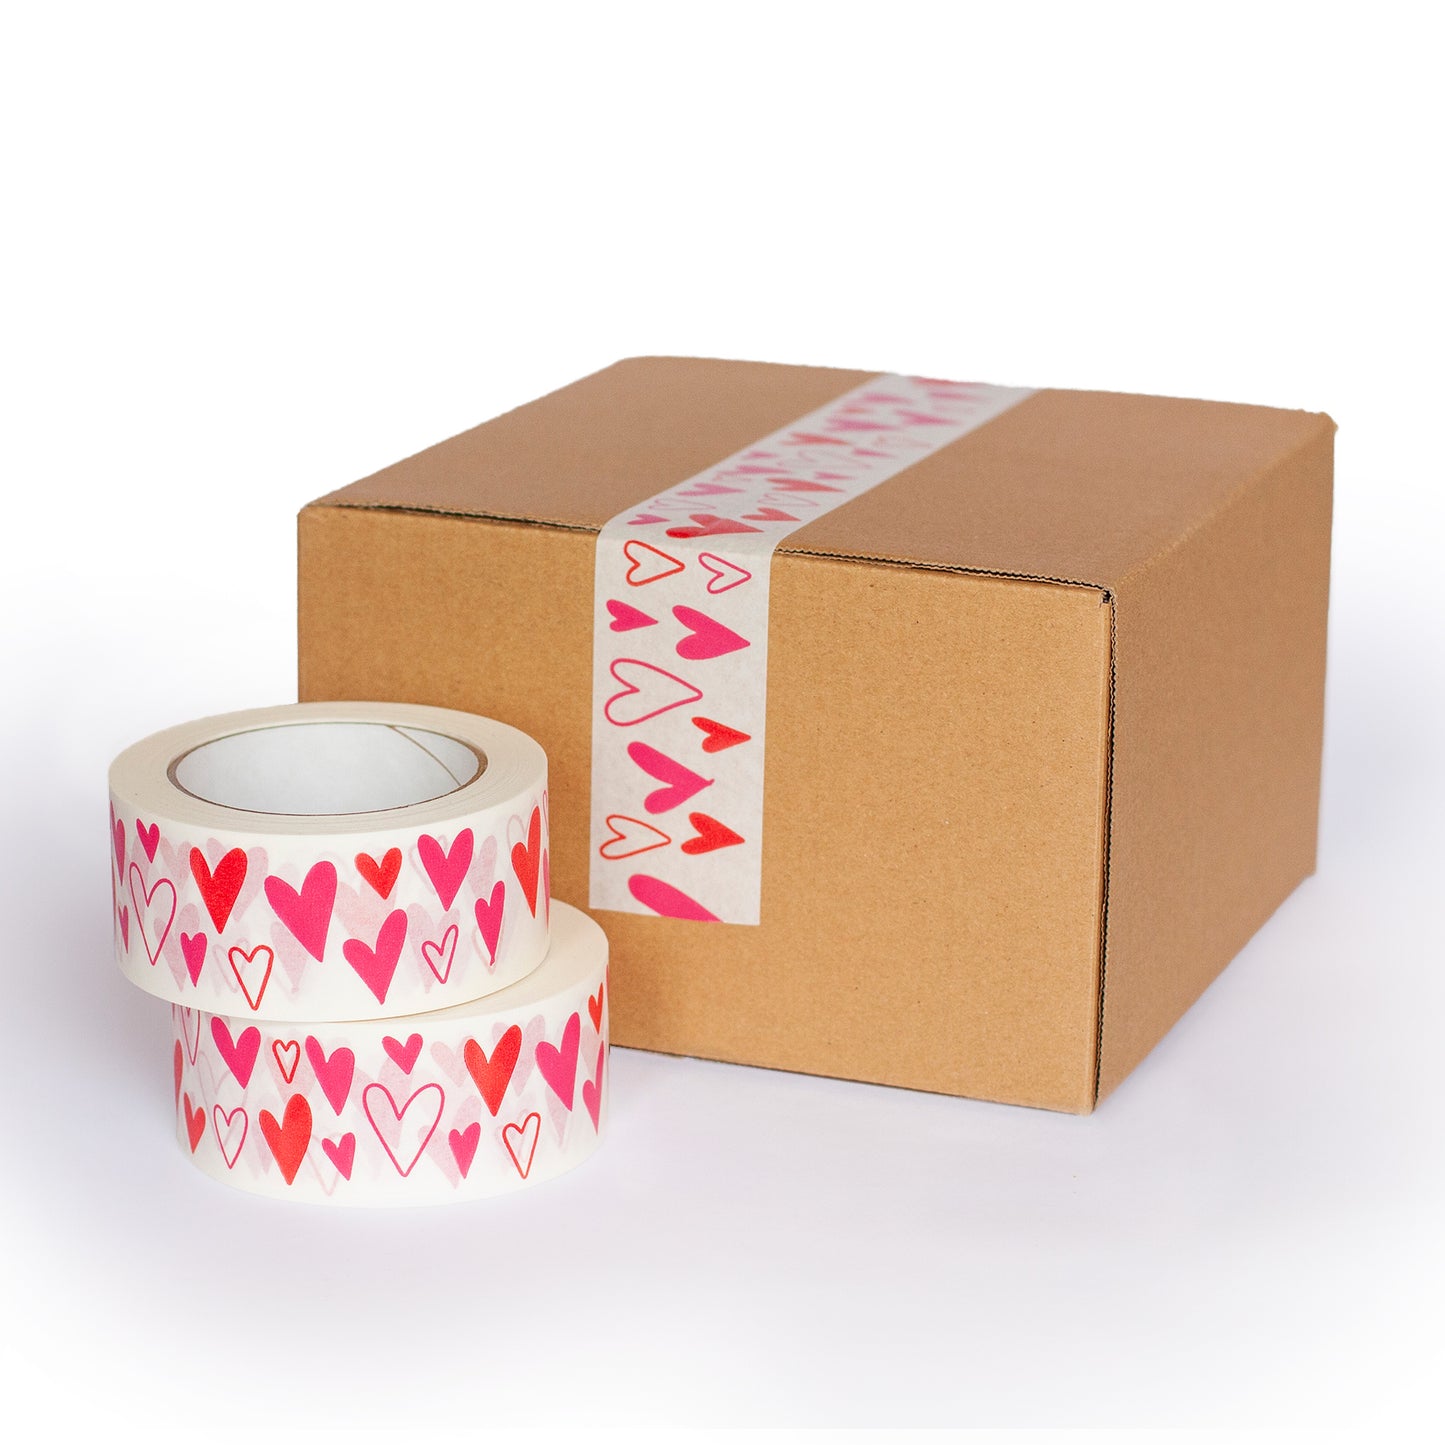 Paper decorative tape valentines heart print, 50m x 48mm. Recycled paper packing tape